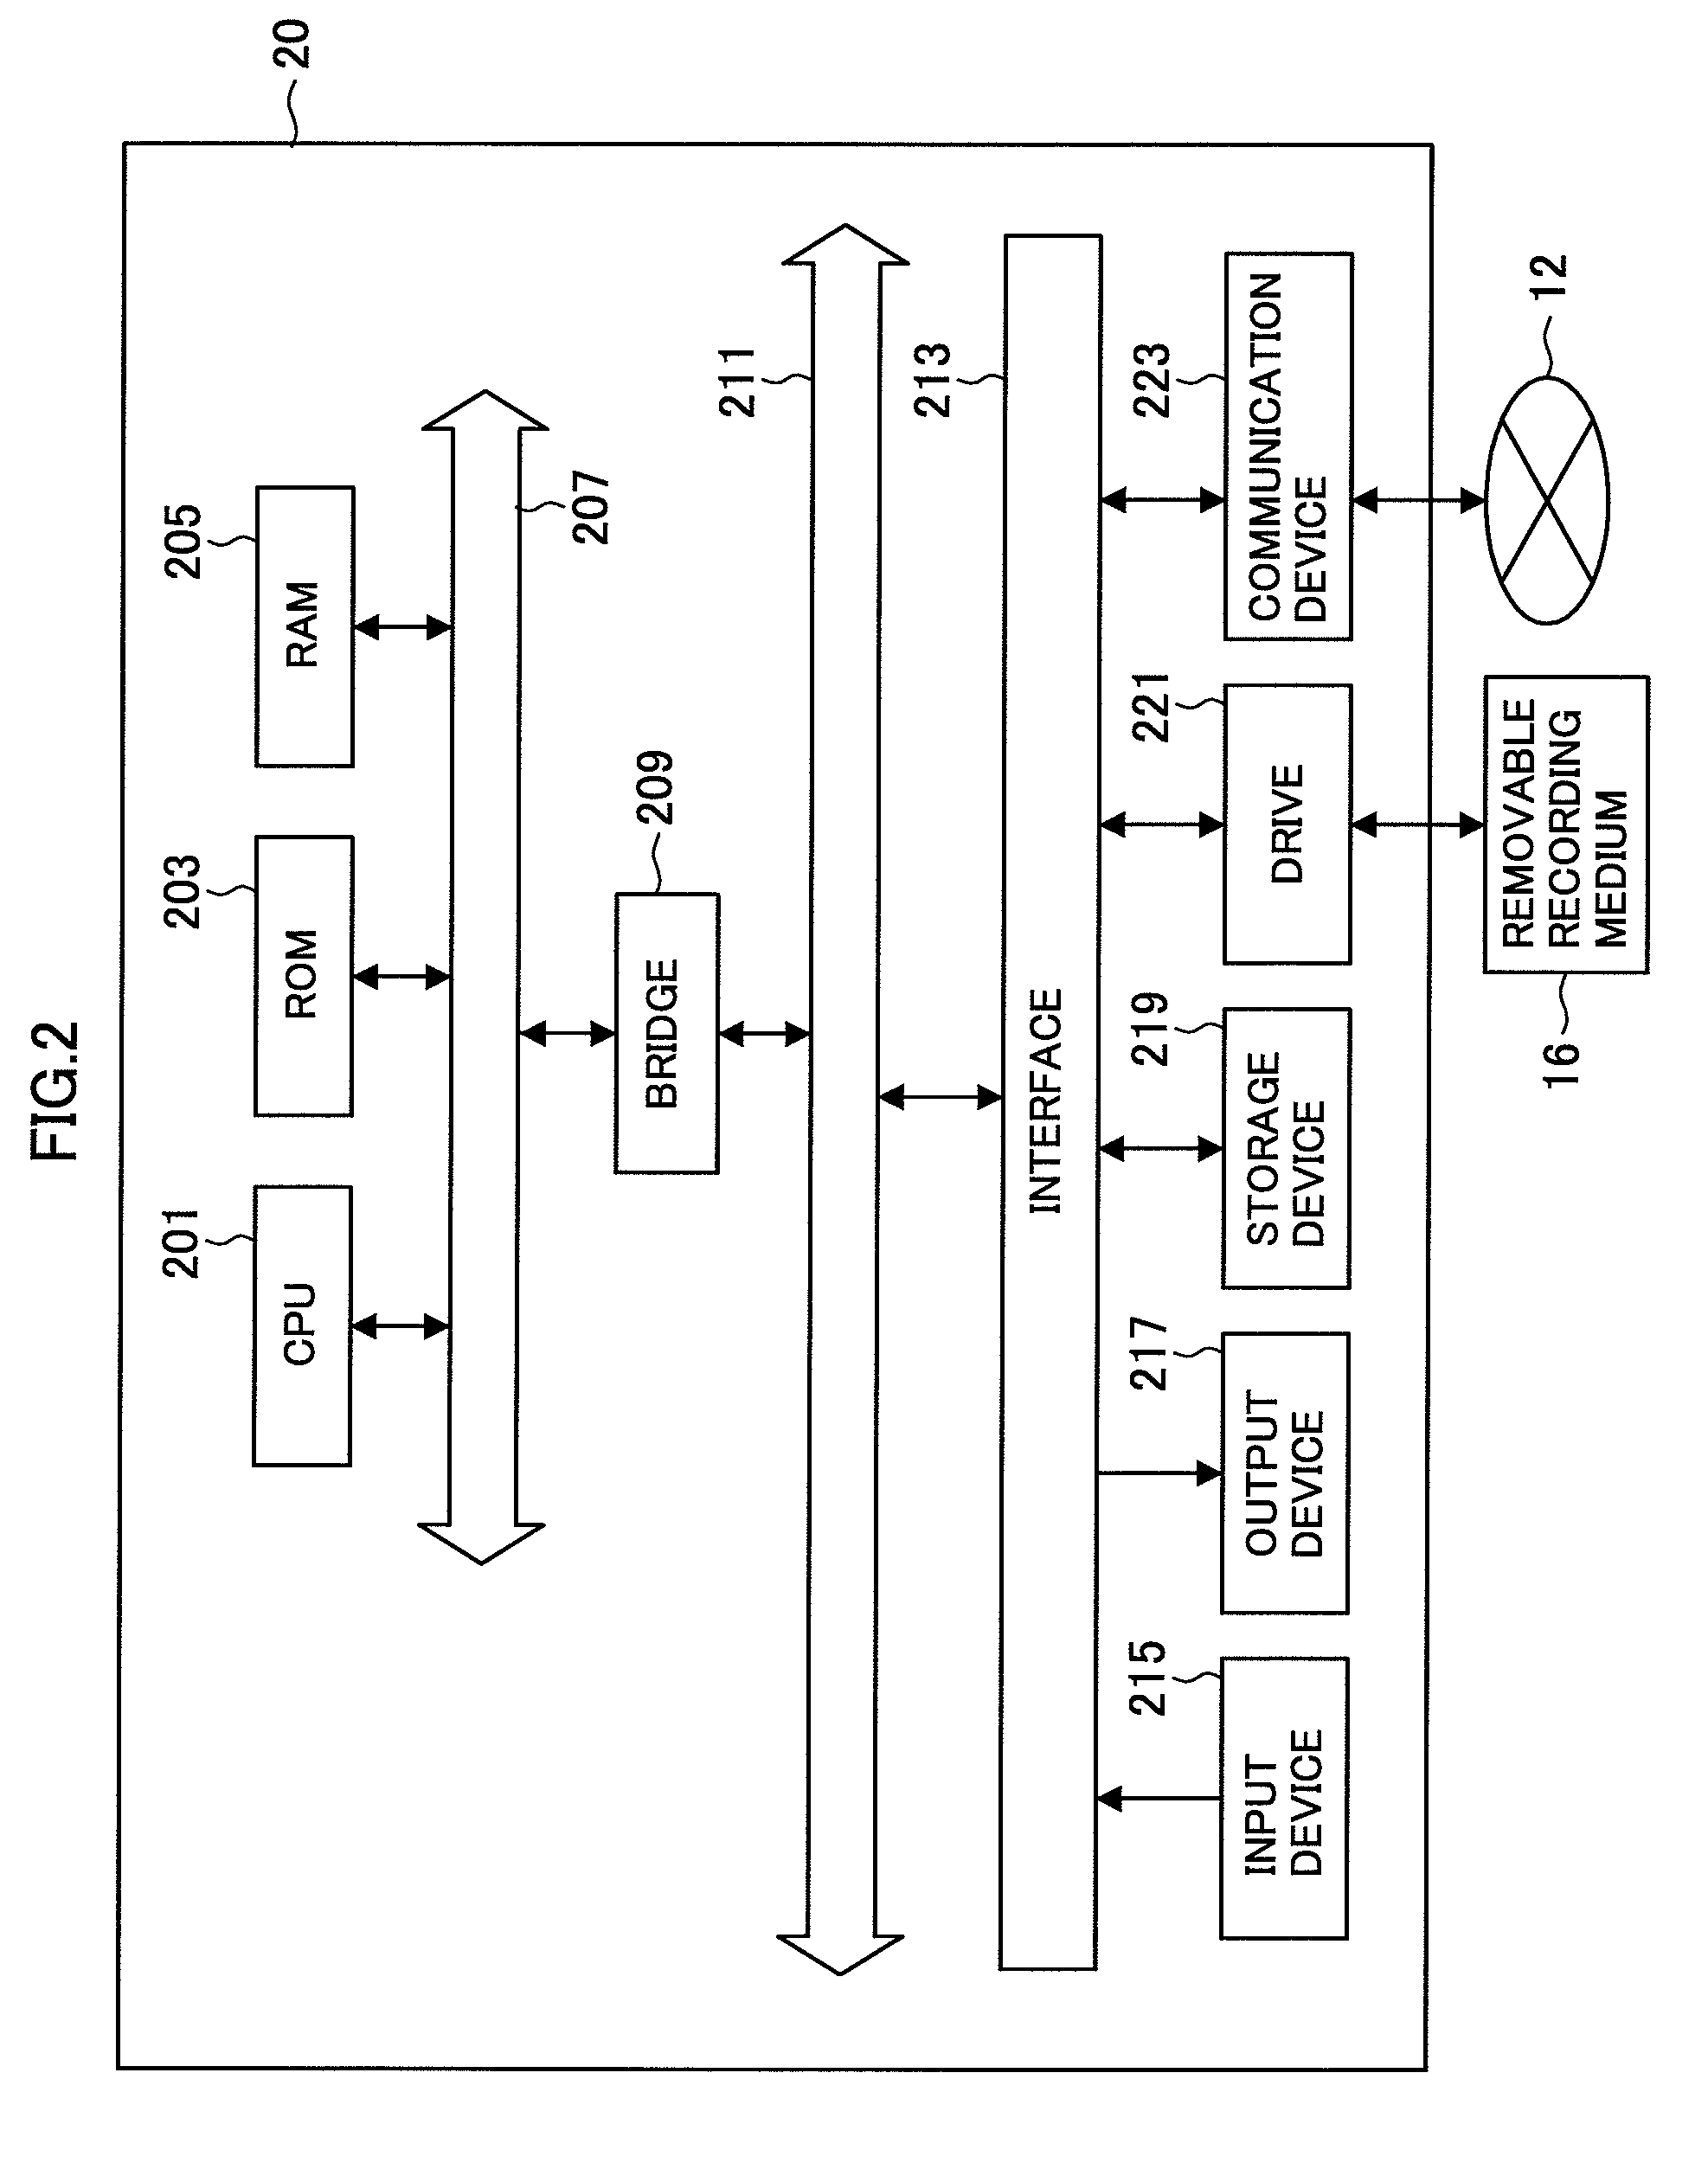 Voice chat system, information processing apparatus, speech recognition method, keyword data electrode detection method, and program for speech recognition